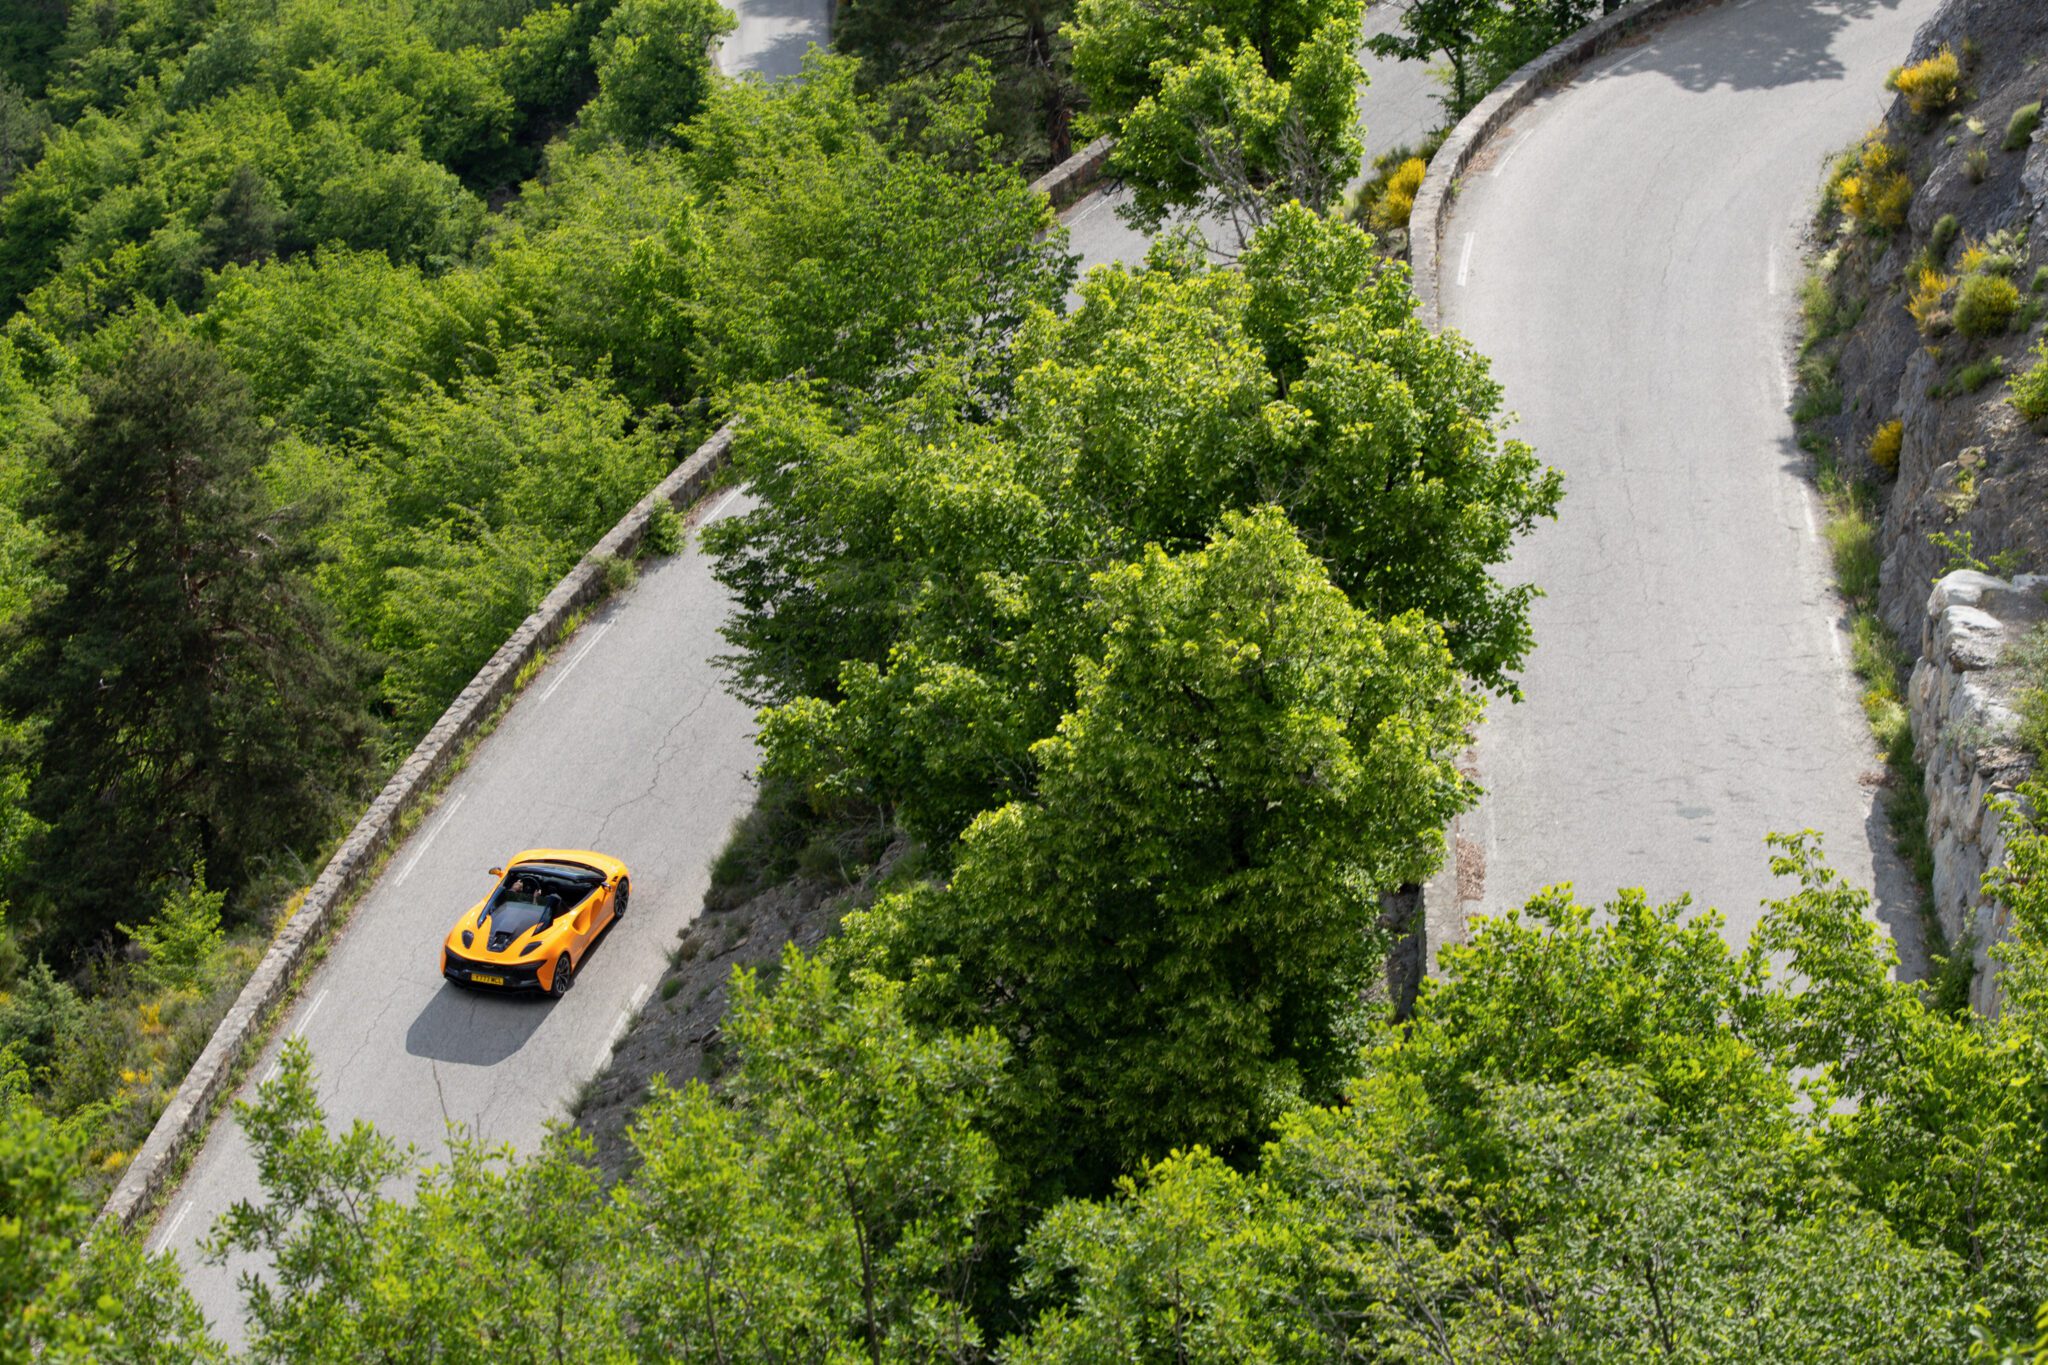 An image of a McLaren Artura Spider driving on a mountain road.